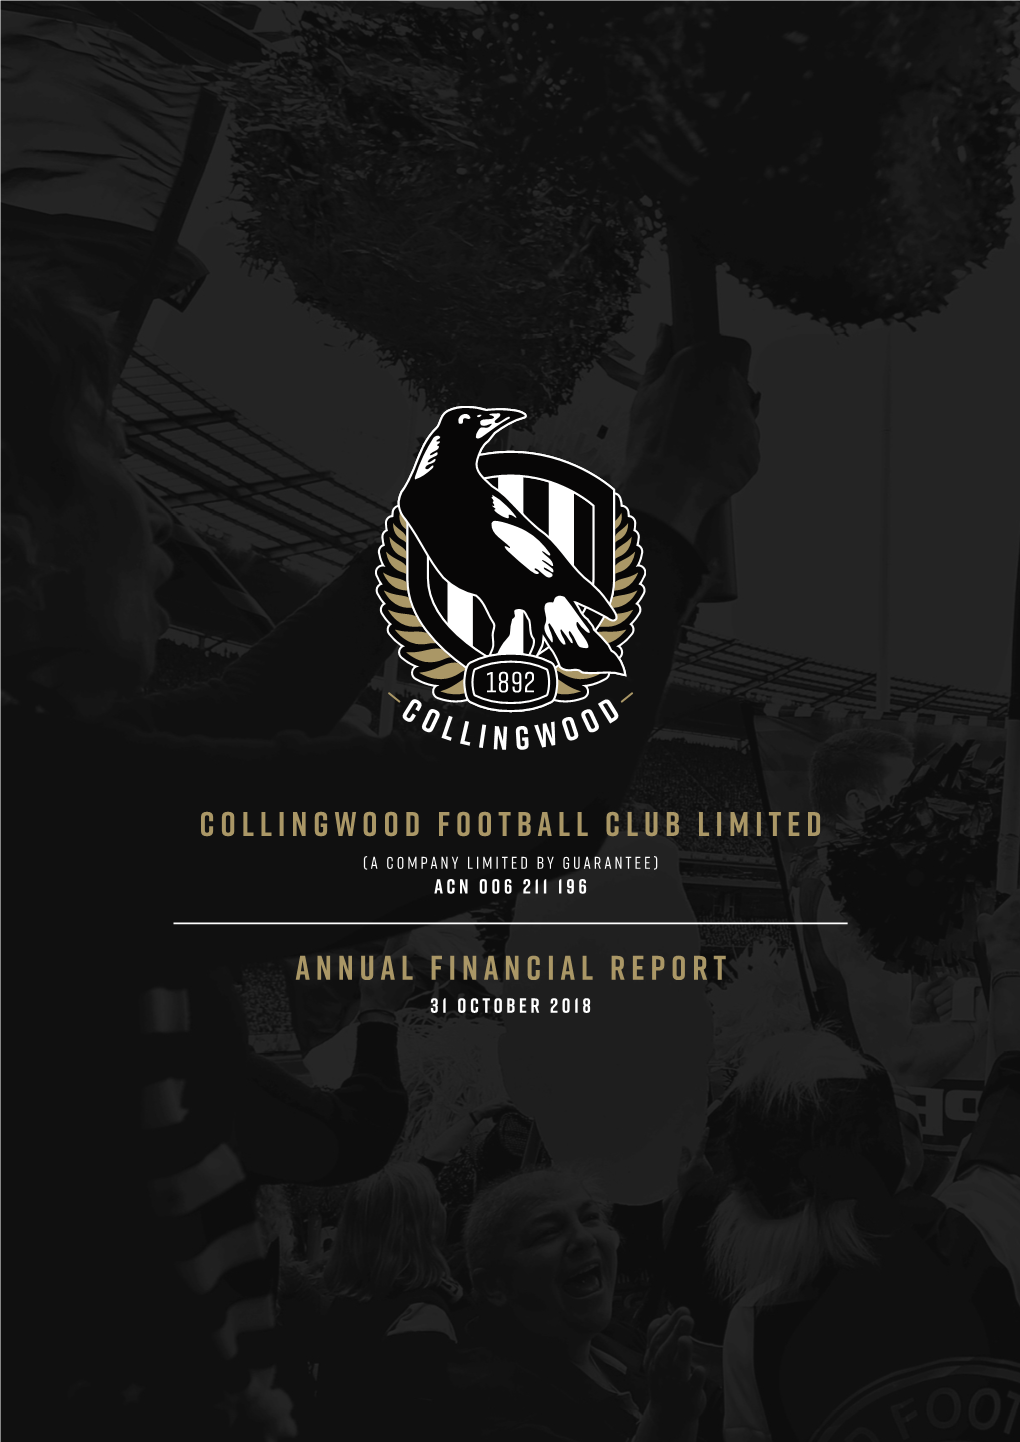 Collingwood Football Club Limited ANNUAL FINANCIAL REPORT